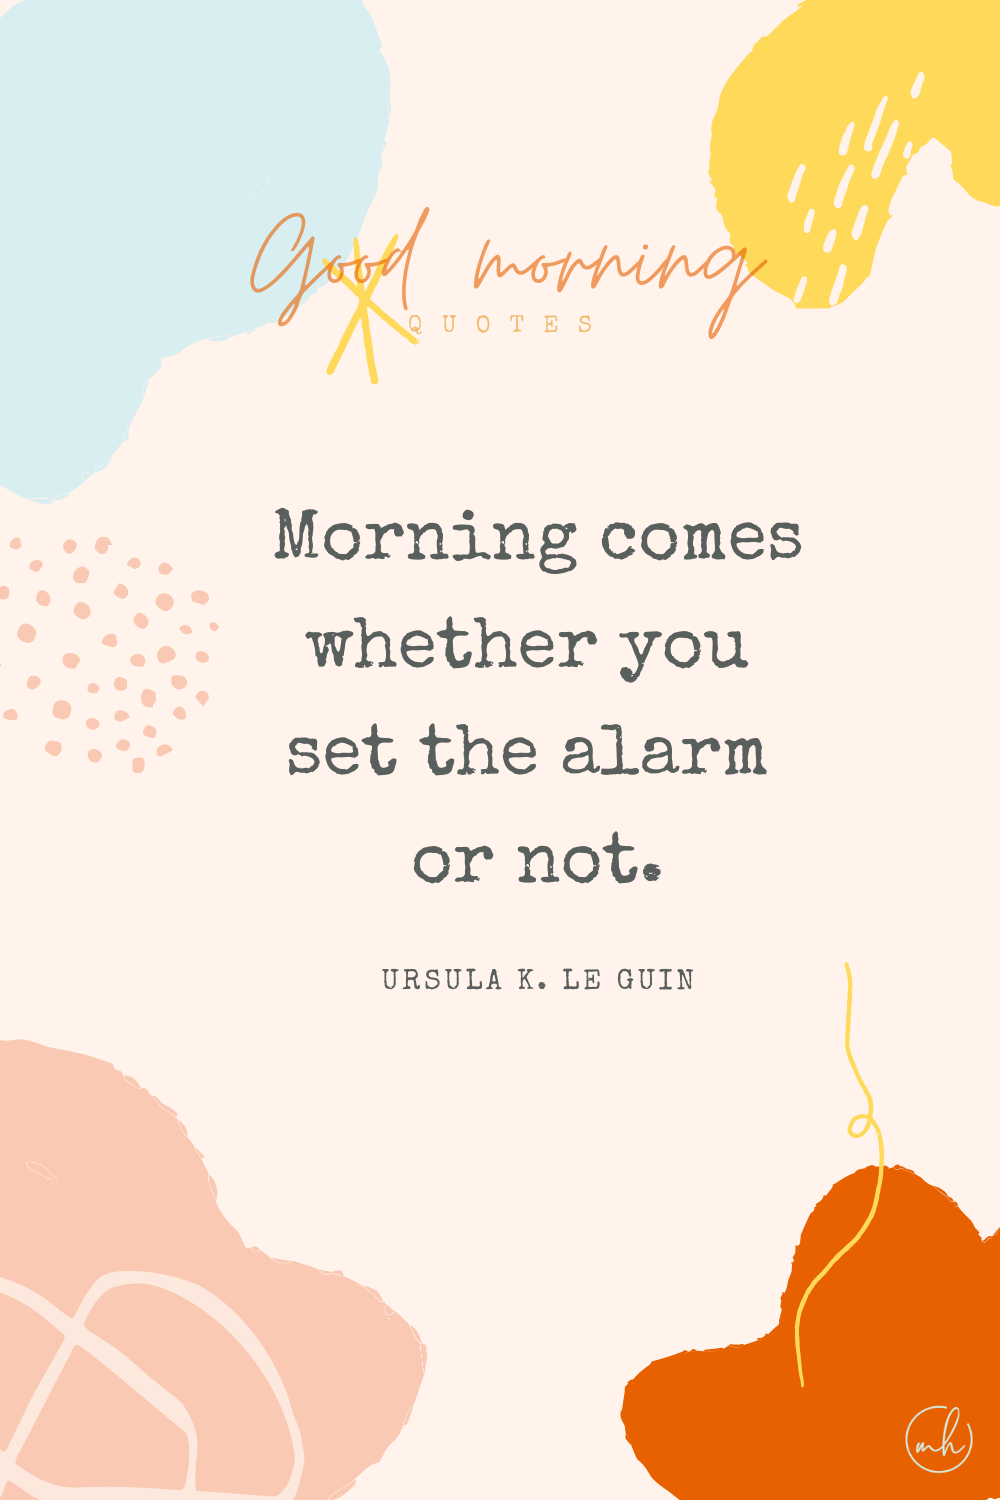 "Morning comes whether you set the alarm or not." – Ursula K. Le Guin